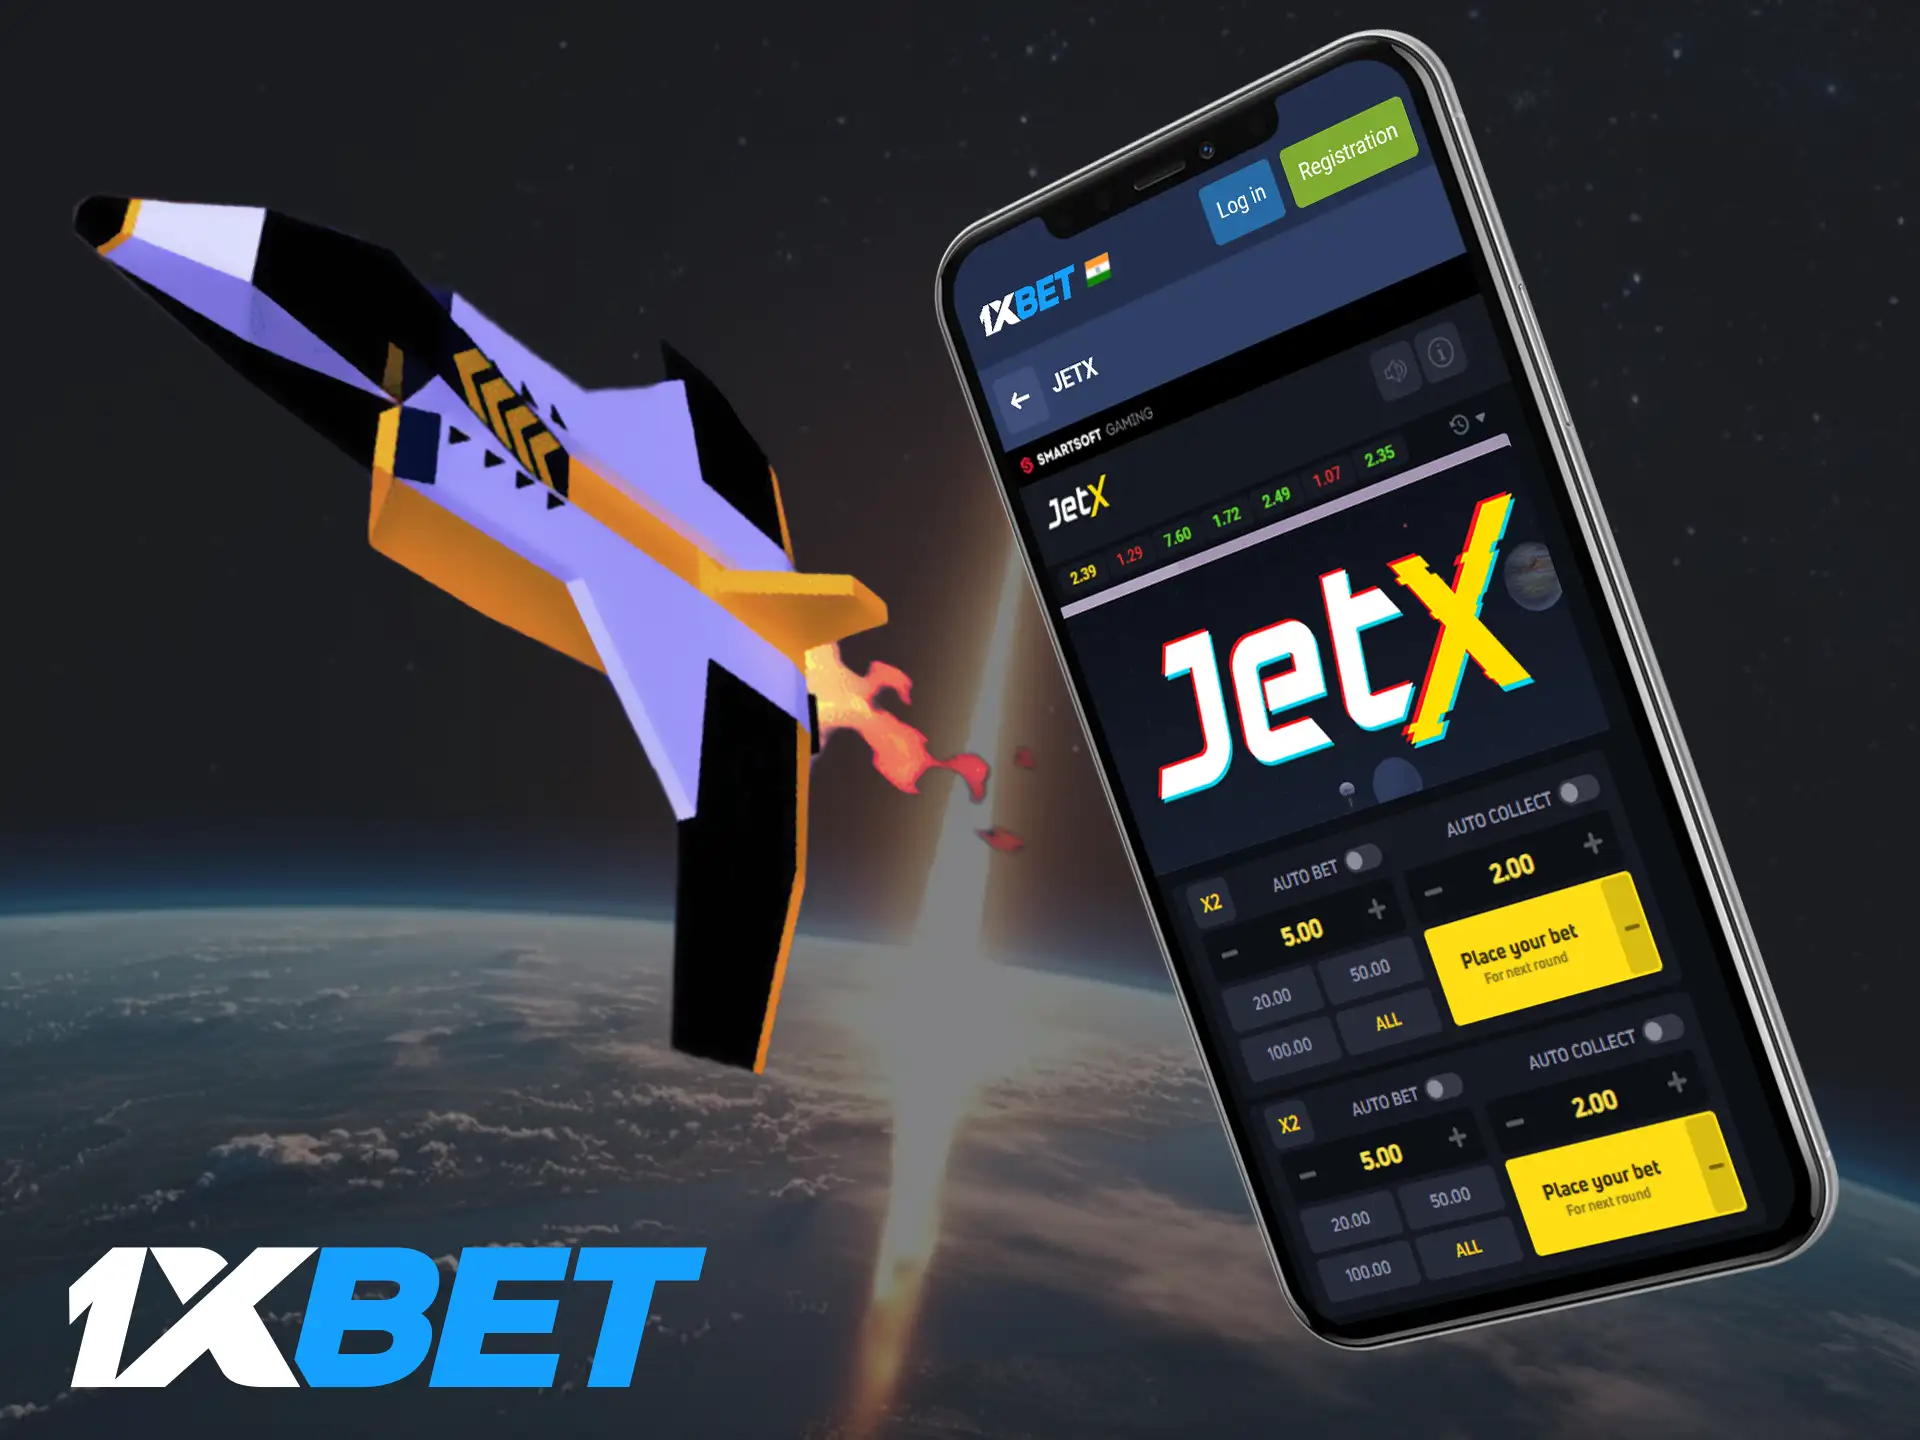 JetX is an exciting online game available at 1xBet.